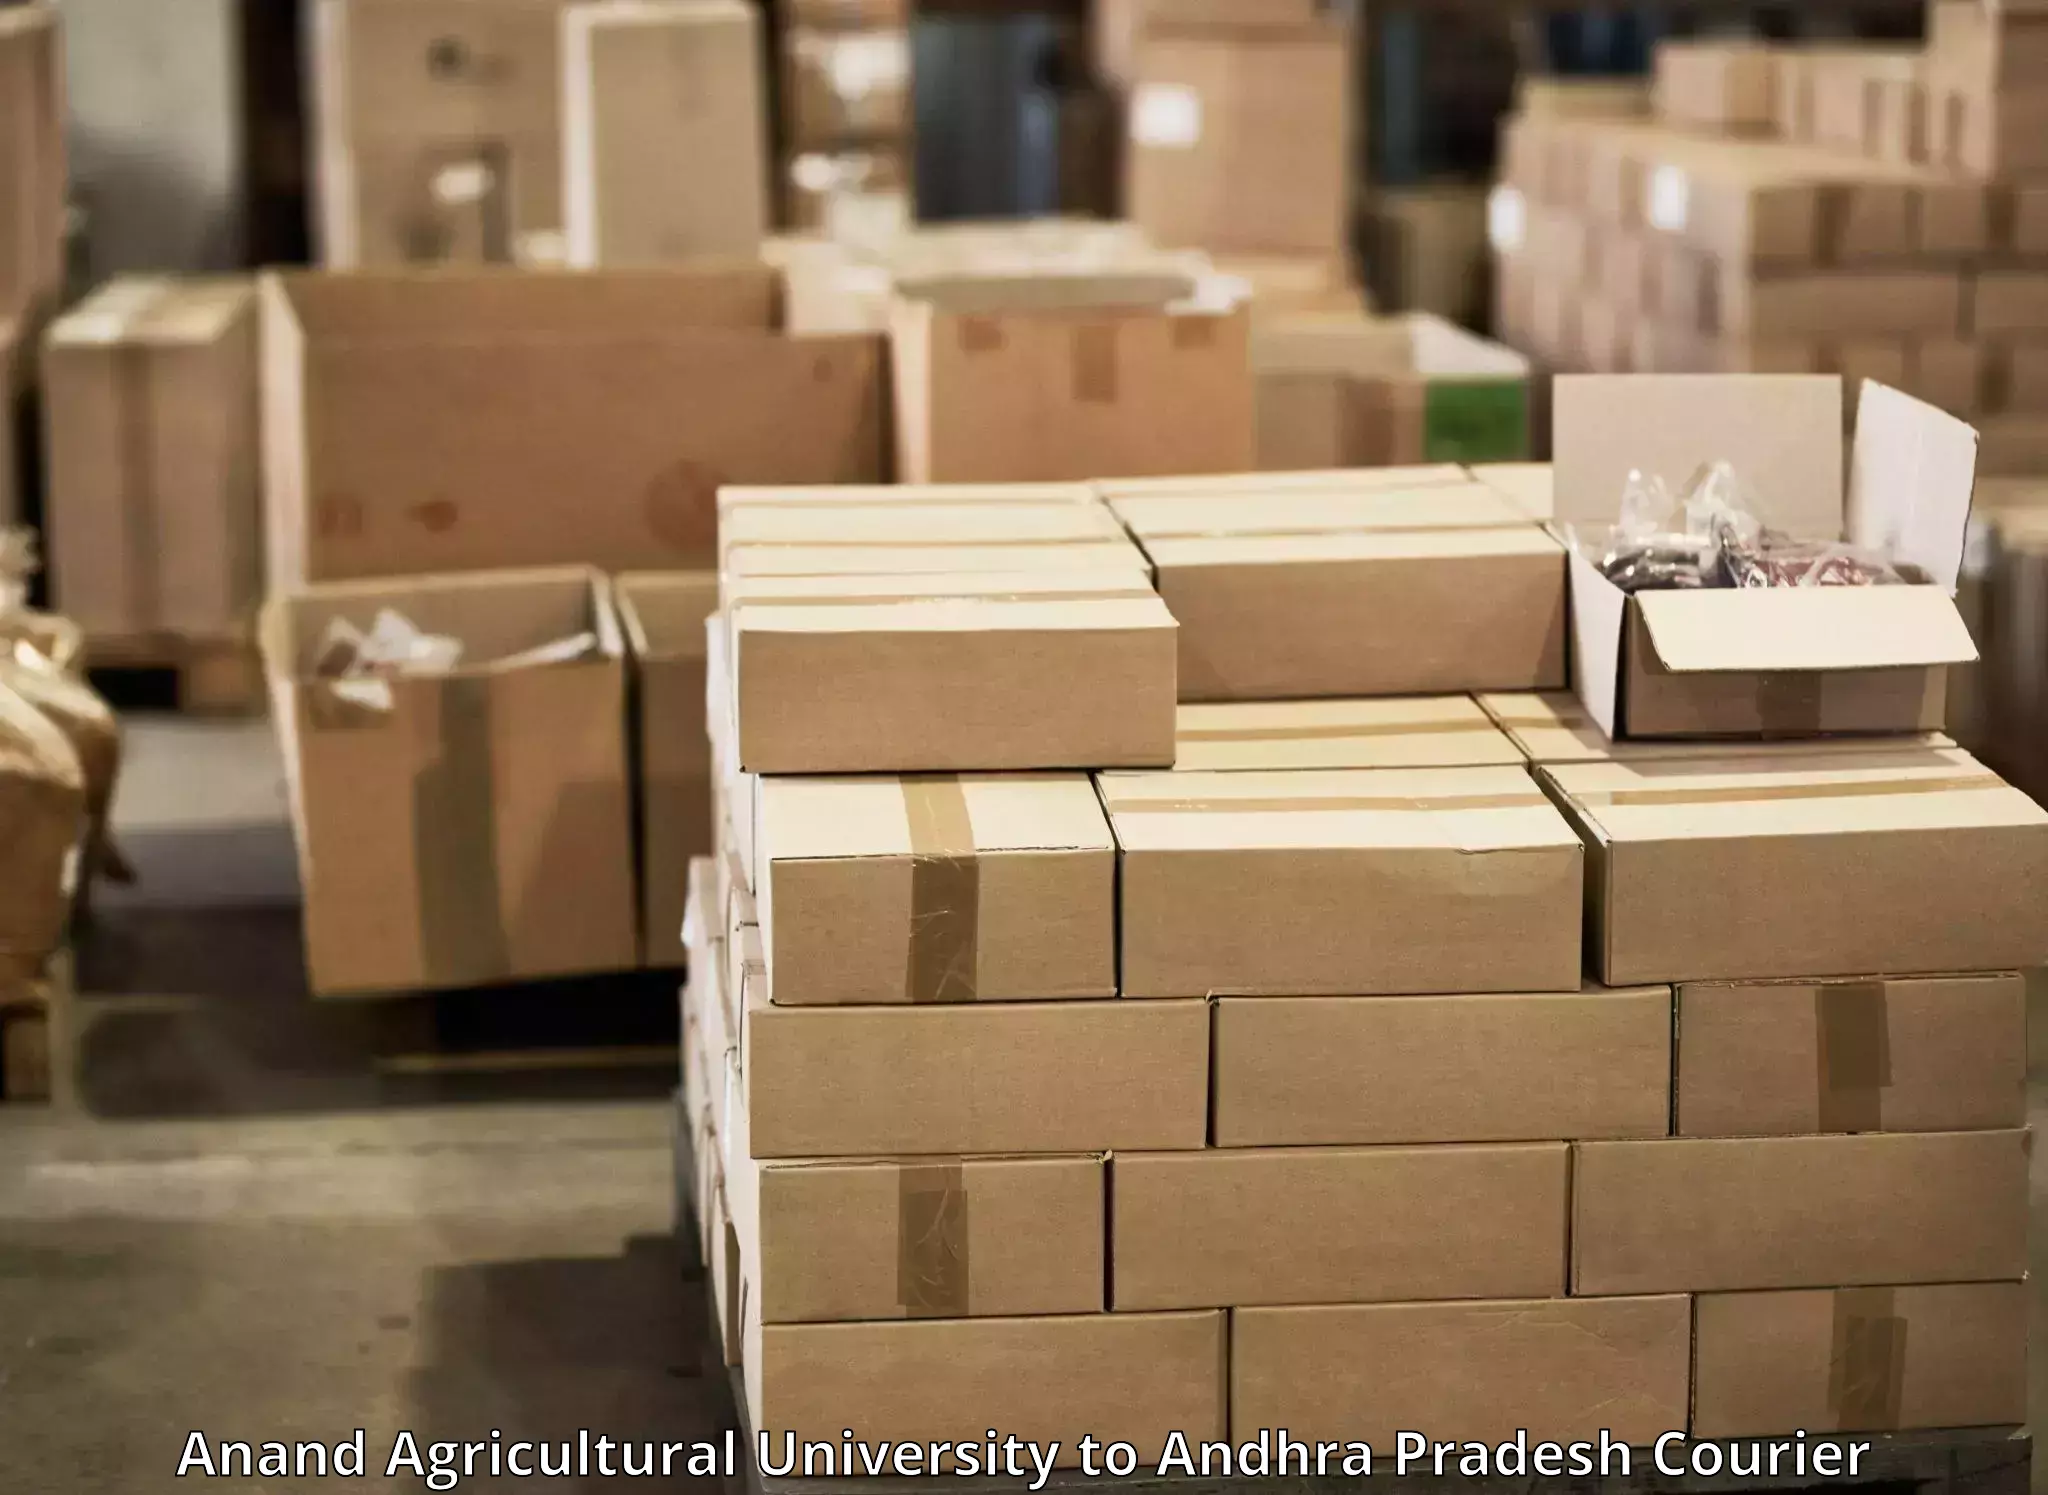 Track and trace shipping Anand Agricultural University to Mylavaram